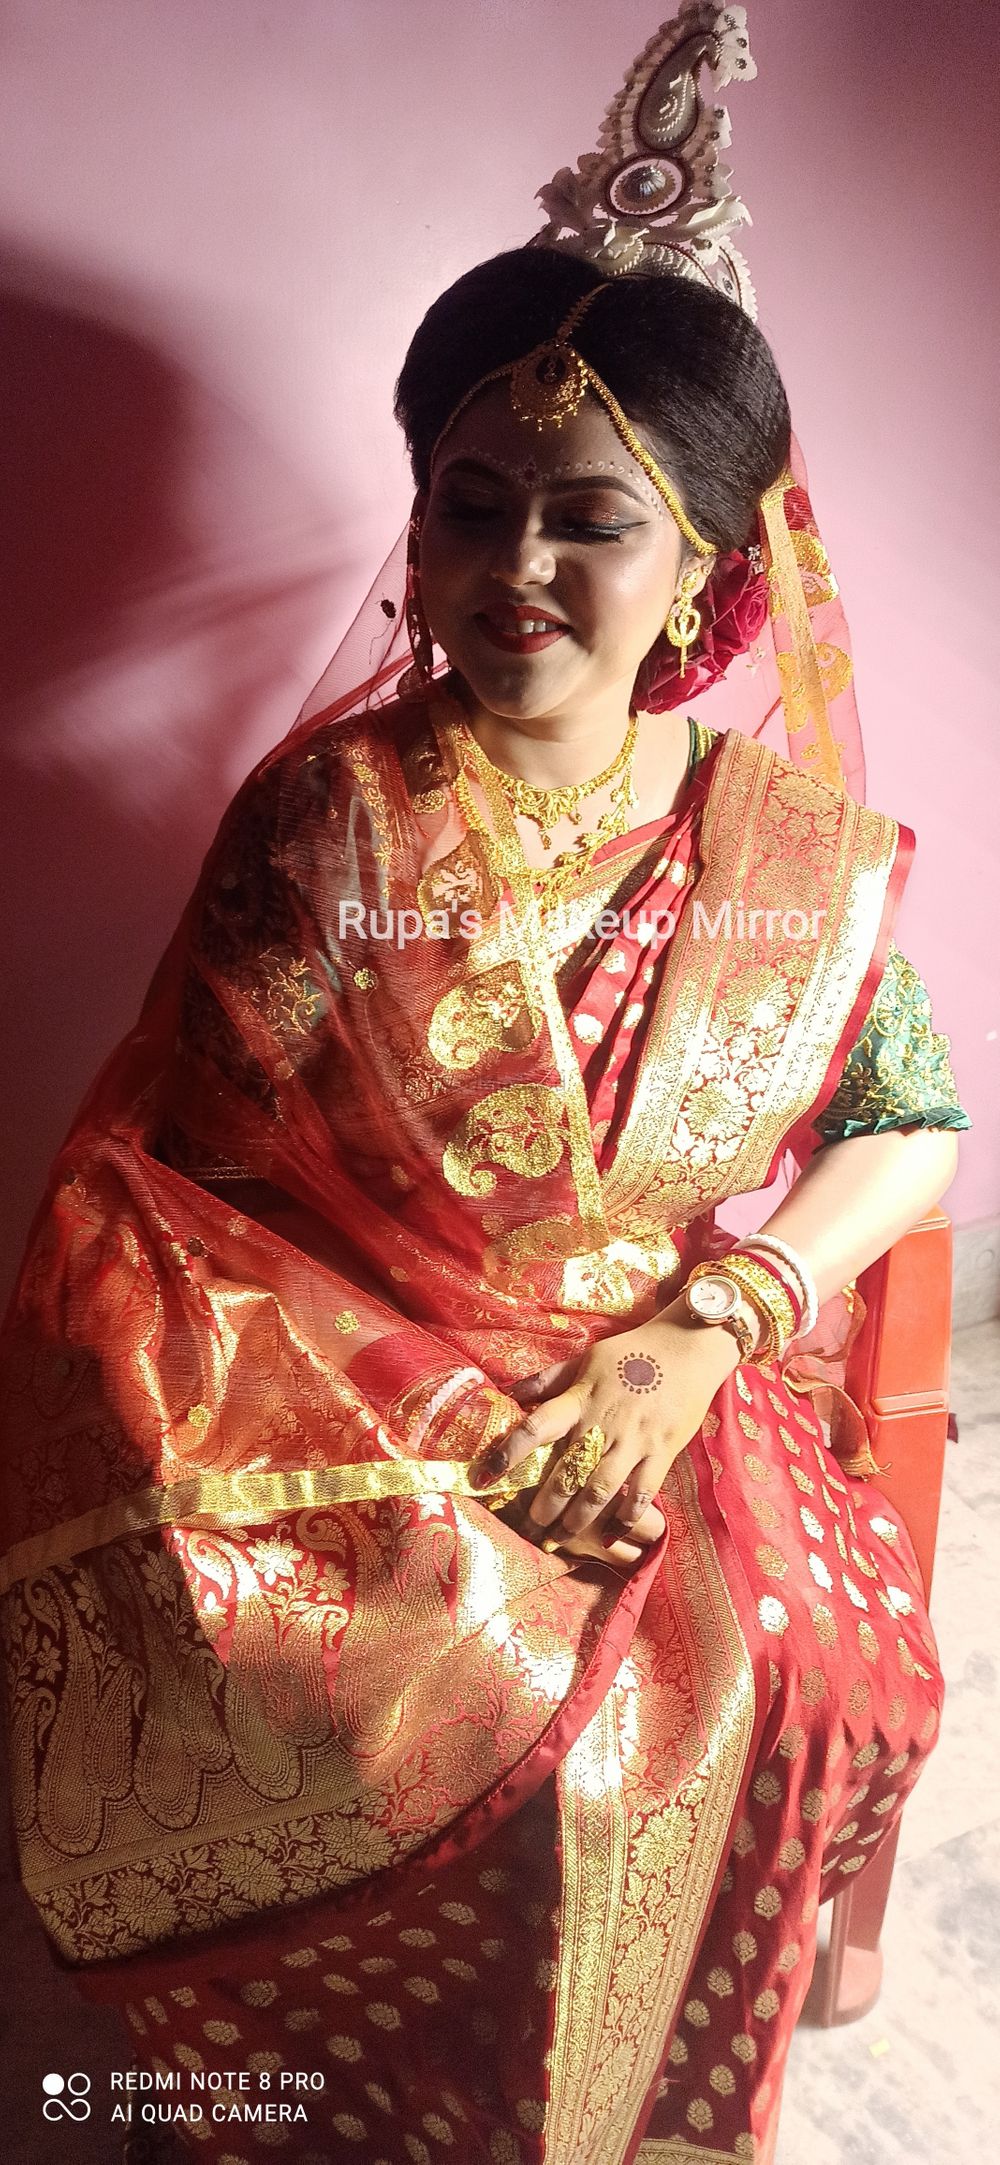 Photo From Bridal Makeover-74 - By Rupa's Makeup Mirror